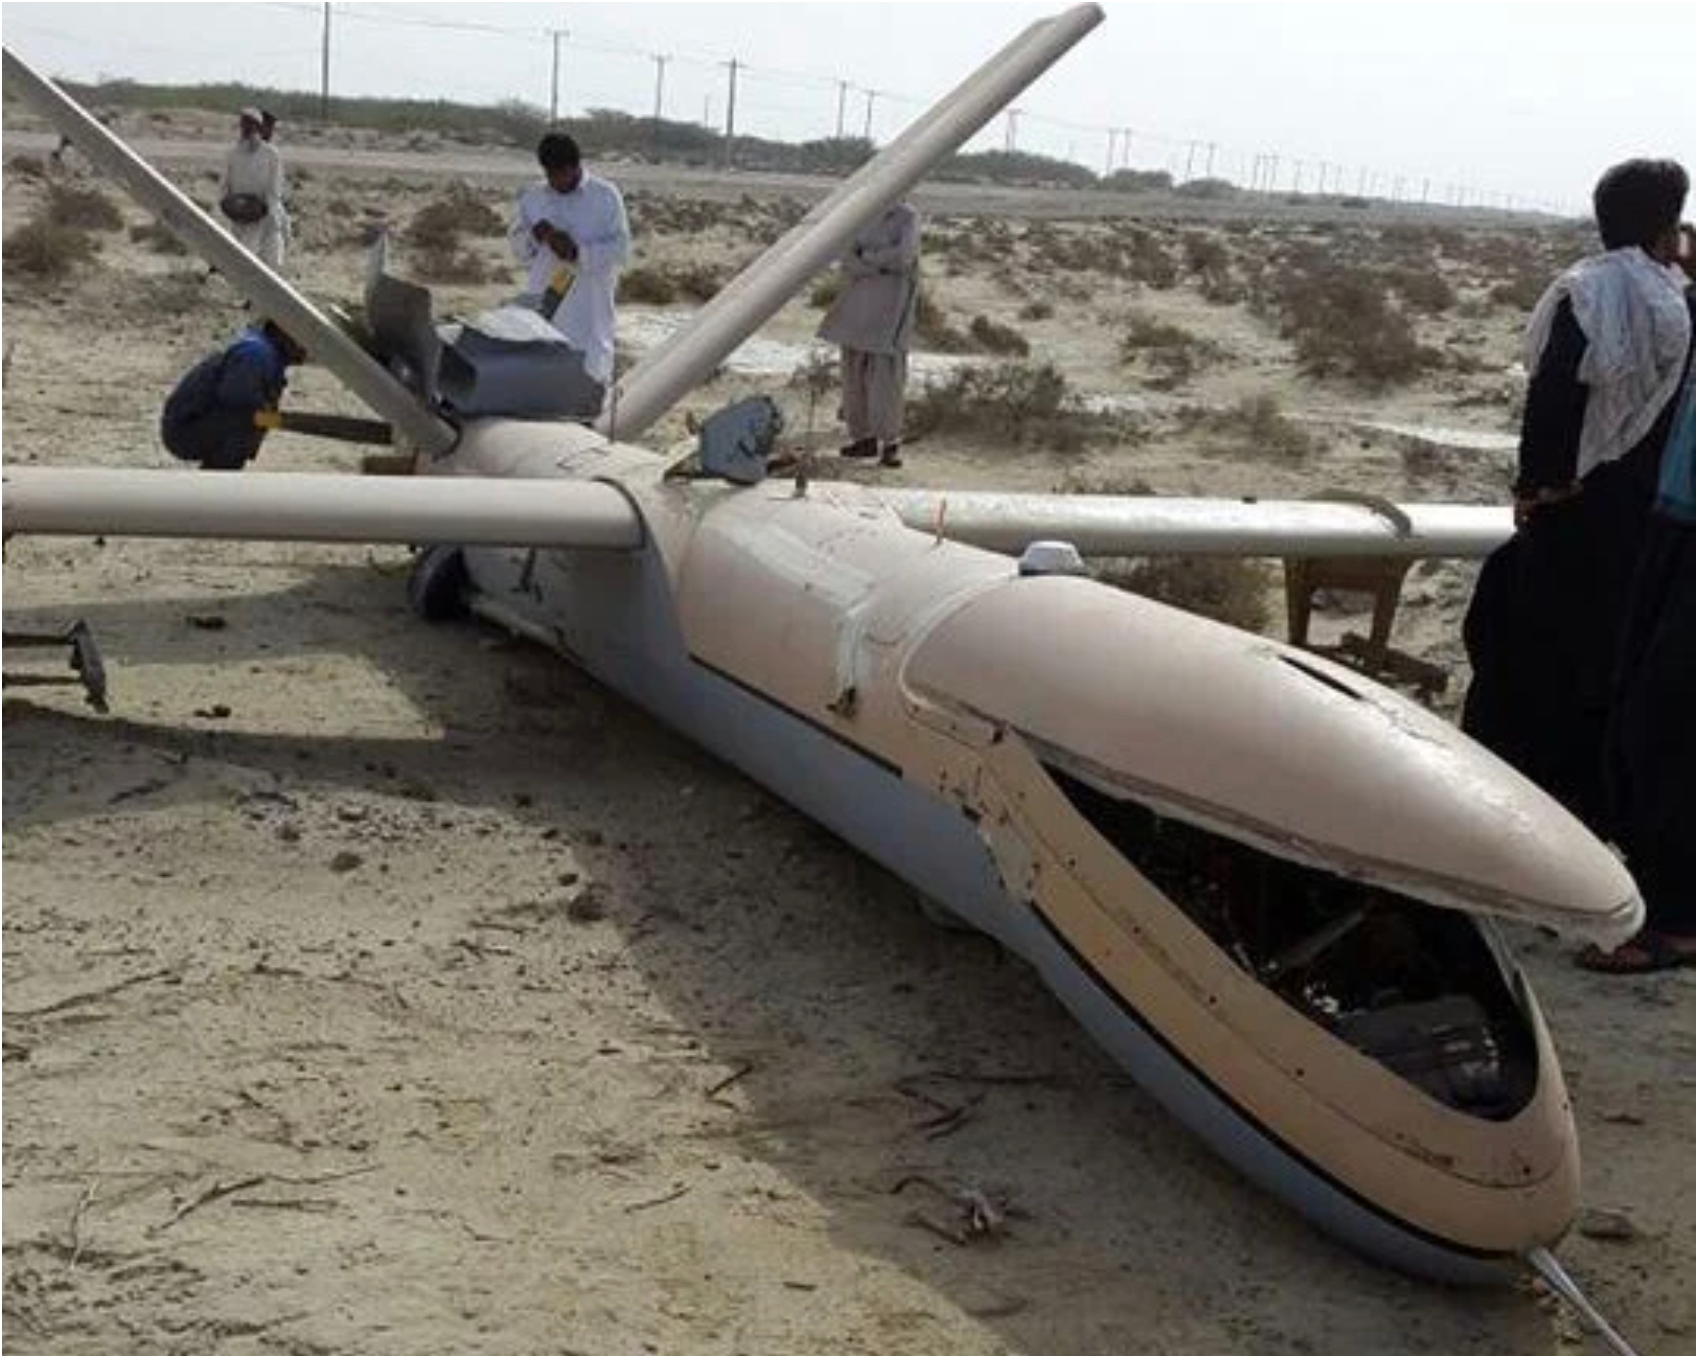 Iranian Shahed-129 destroyed in Pakistan, Russia May Use Iranian Drones to Hunt HIMARS MLRS in Ukraine, Defense Express